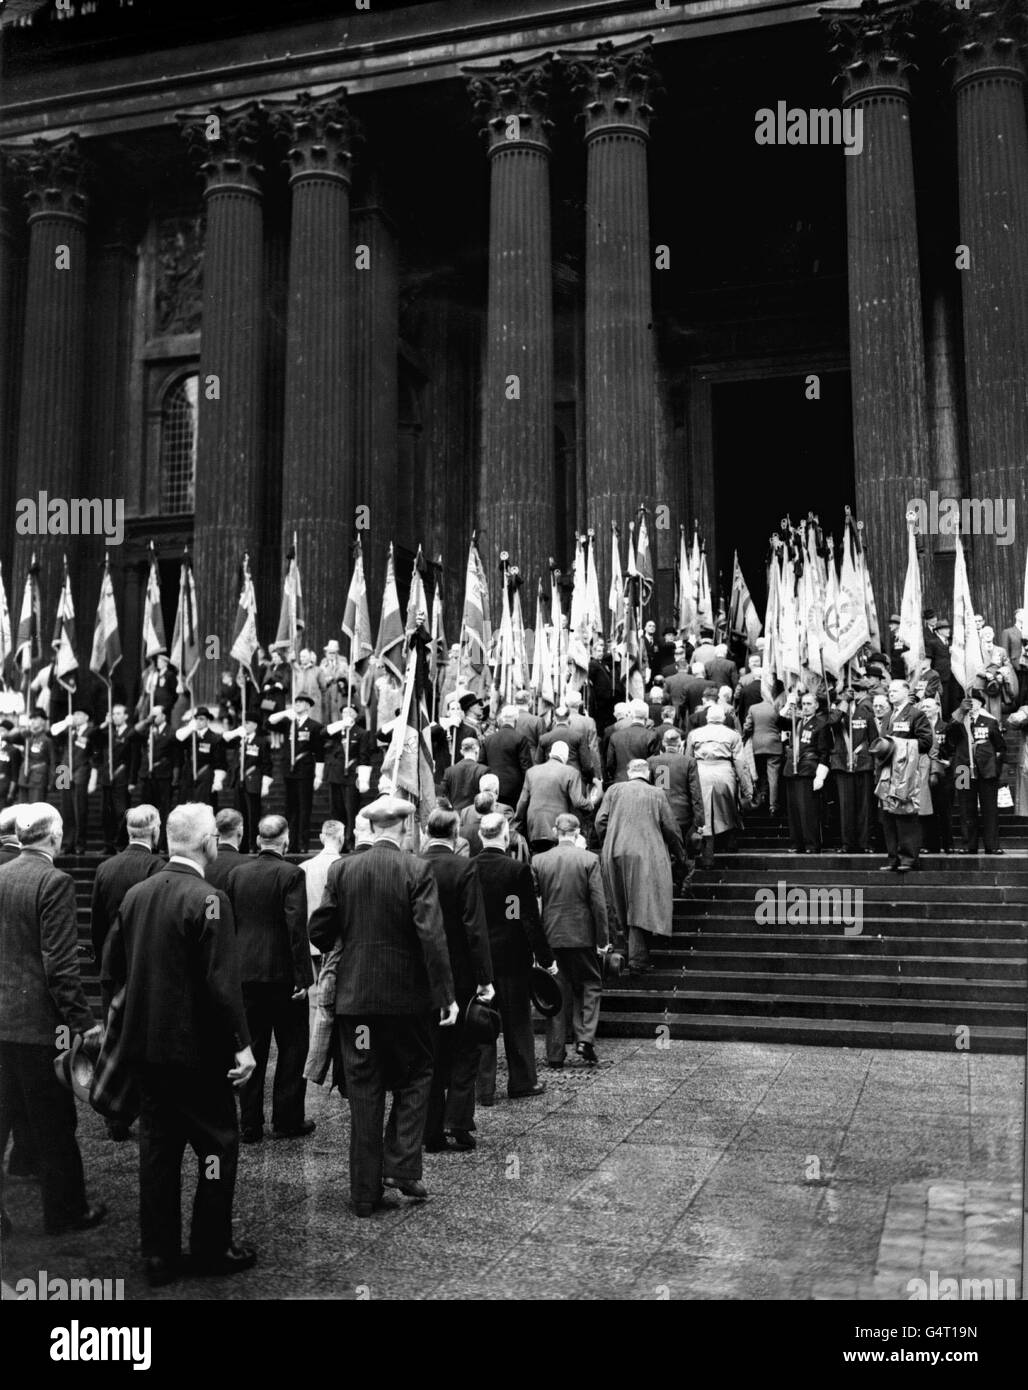 THE BOER WAR: Boer War veterans at St. Paul's Cathedral. Standards are borne bravely as Boer War (1899-1902) veterans enter St. Paul's cathedral, London, for the service commemorating the 50th anniversary of the signing of the Treaty of Vereeniging which brought the South African War to an end. Stock Photo